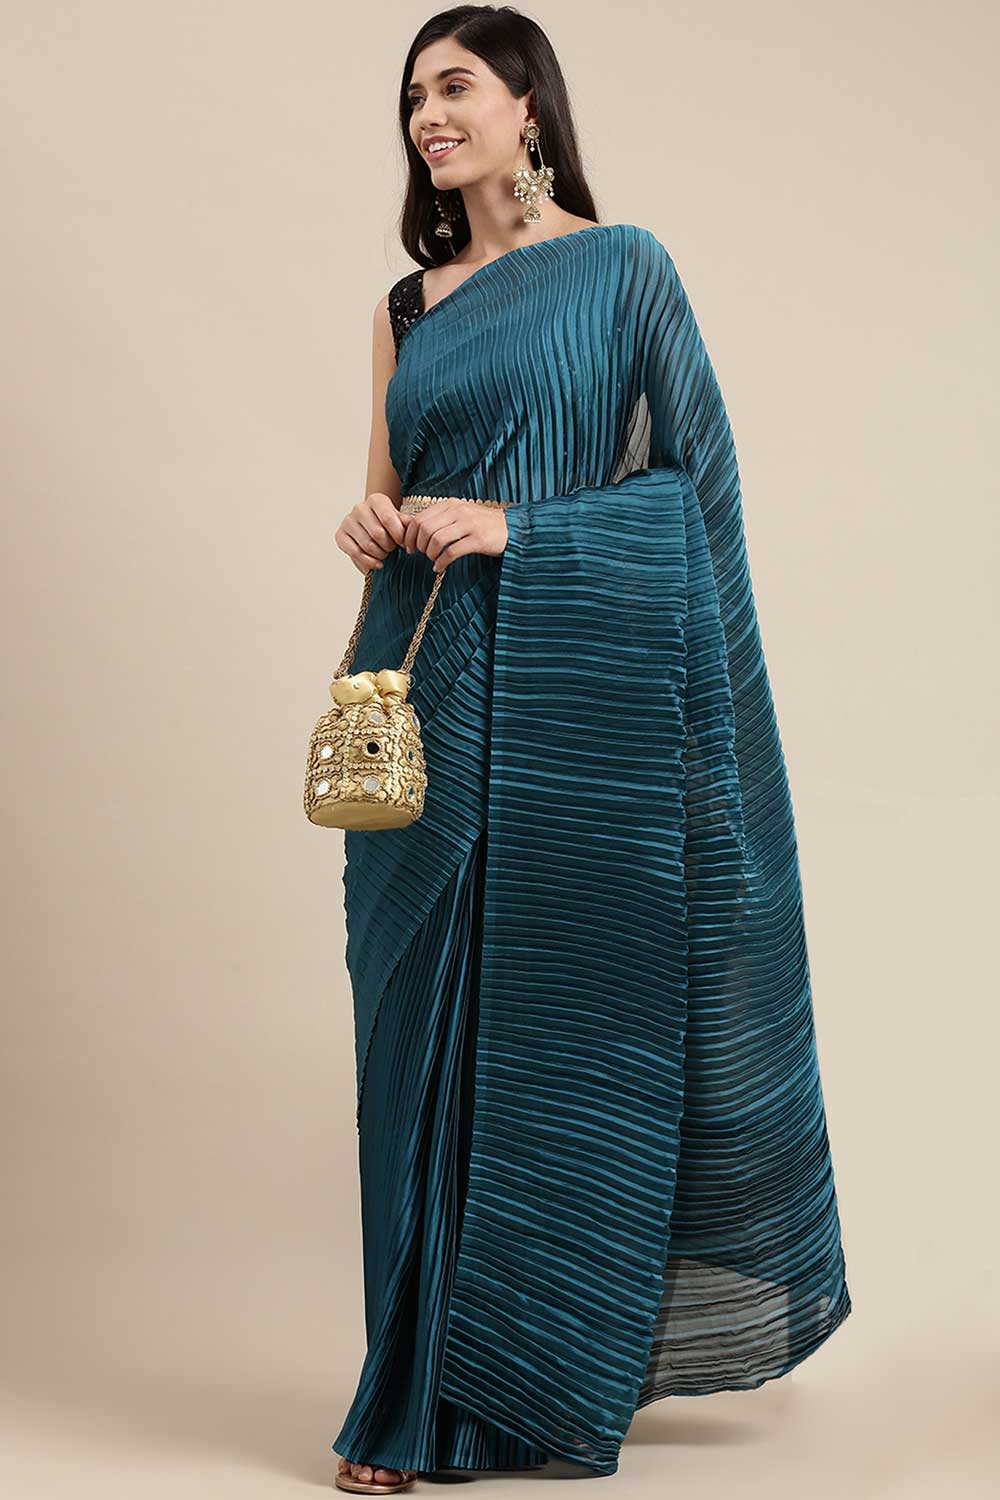 Buy Sony Teal Blue Thin Pleats Georgette One Minute Saree Online